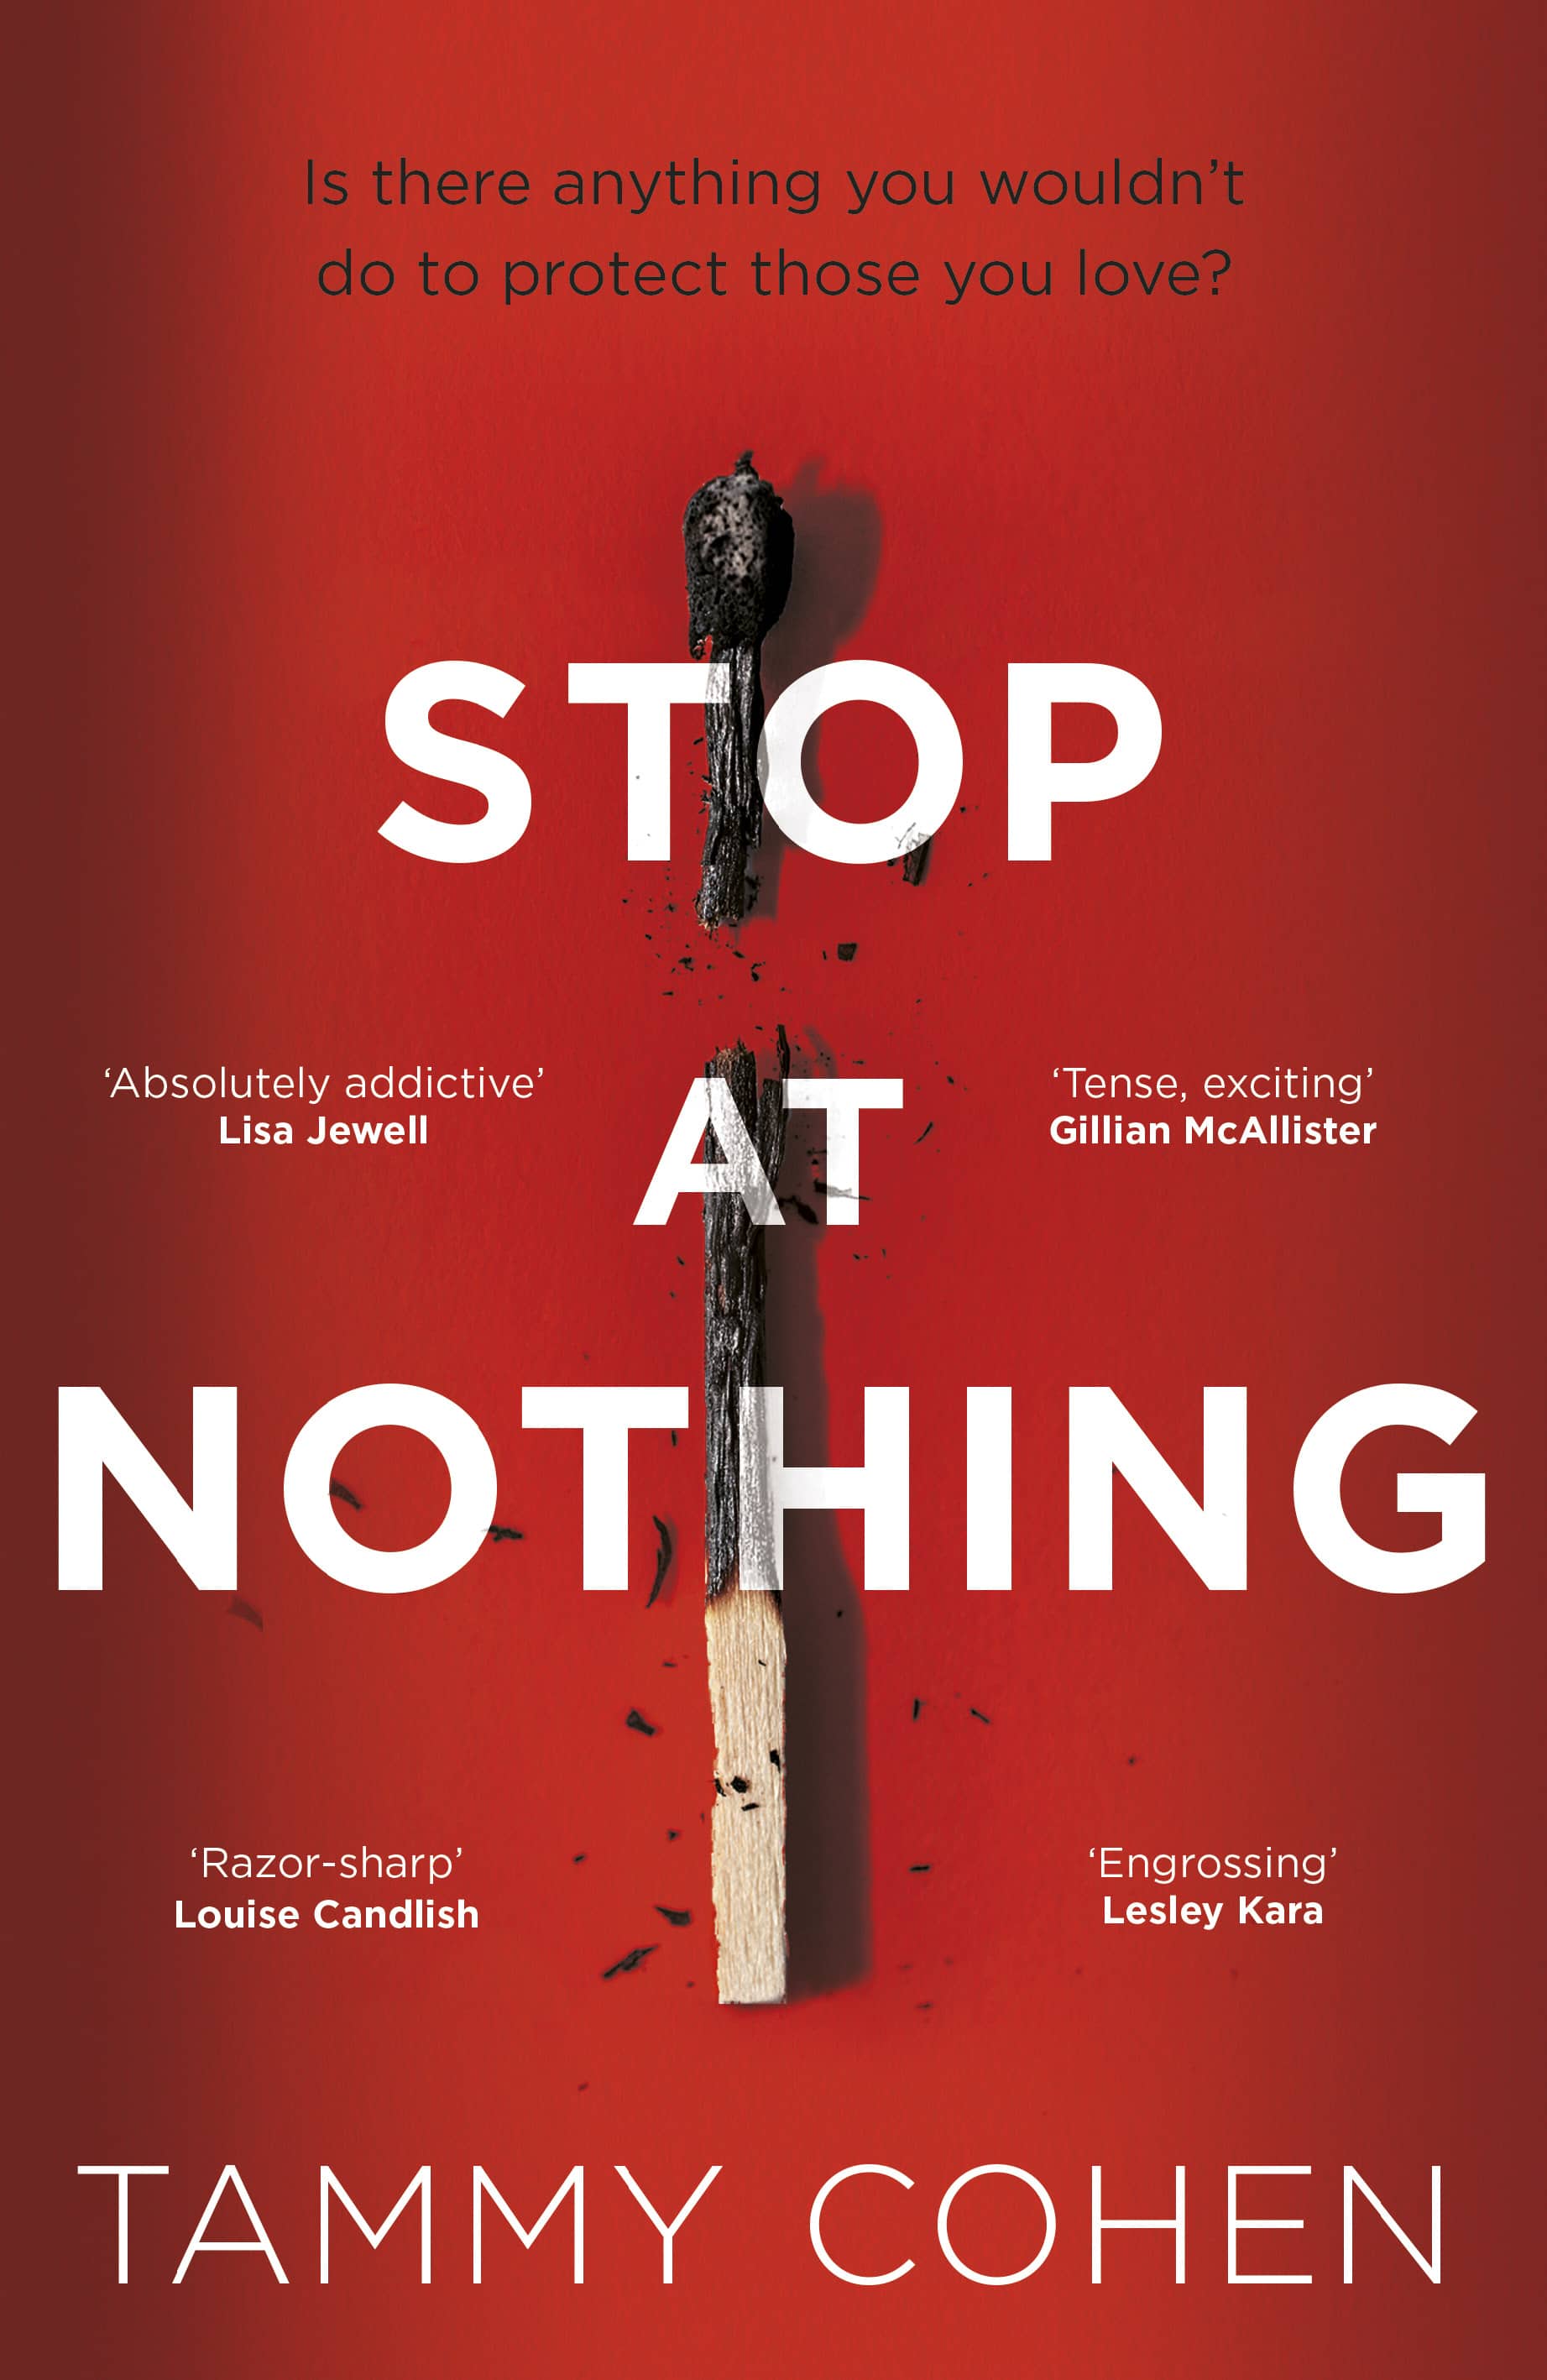 Stop At Nothing by Tammy Cohen, one of the best books out in May 2020